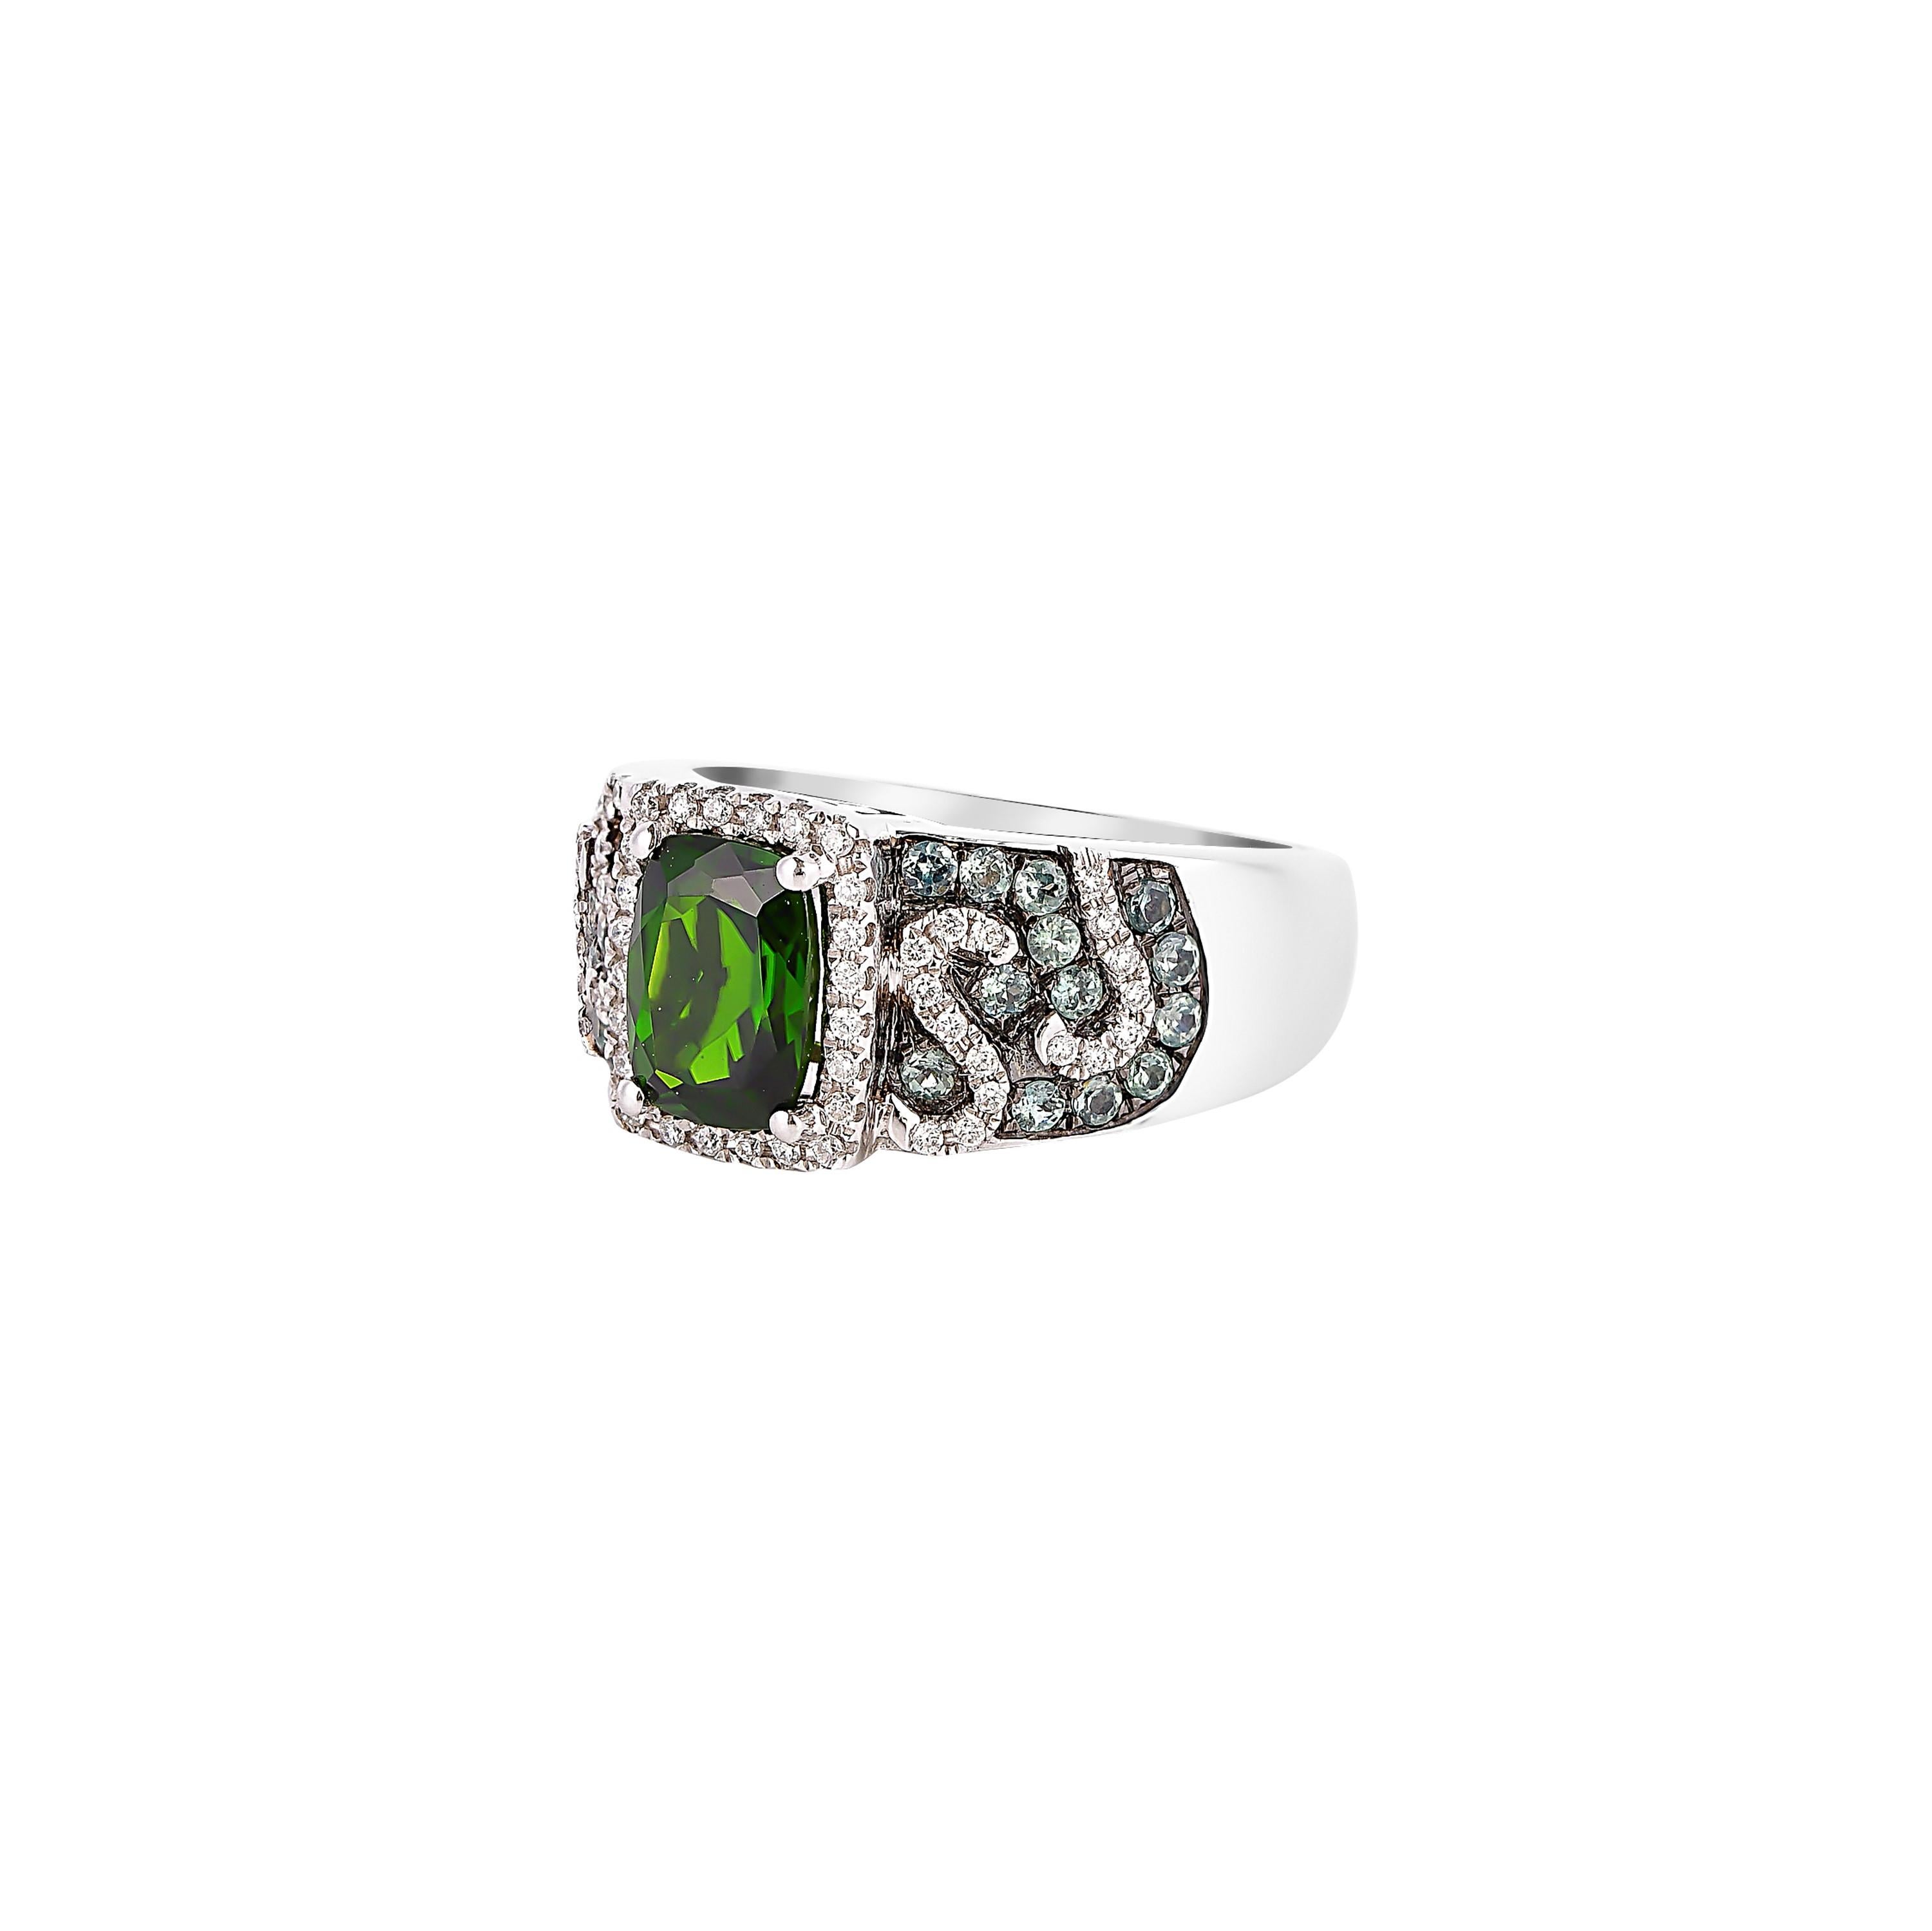 Contemporary 1.50 Carat Chrome Diopside Ring in 14 Karat White Gold For Sale